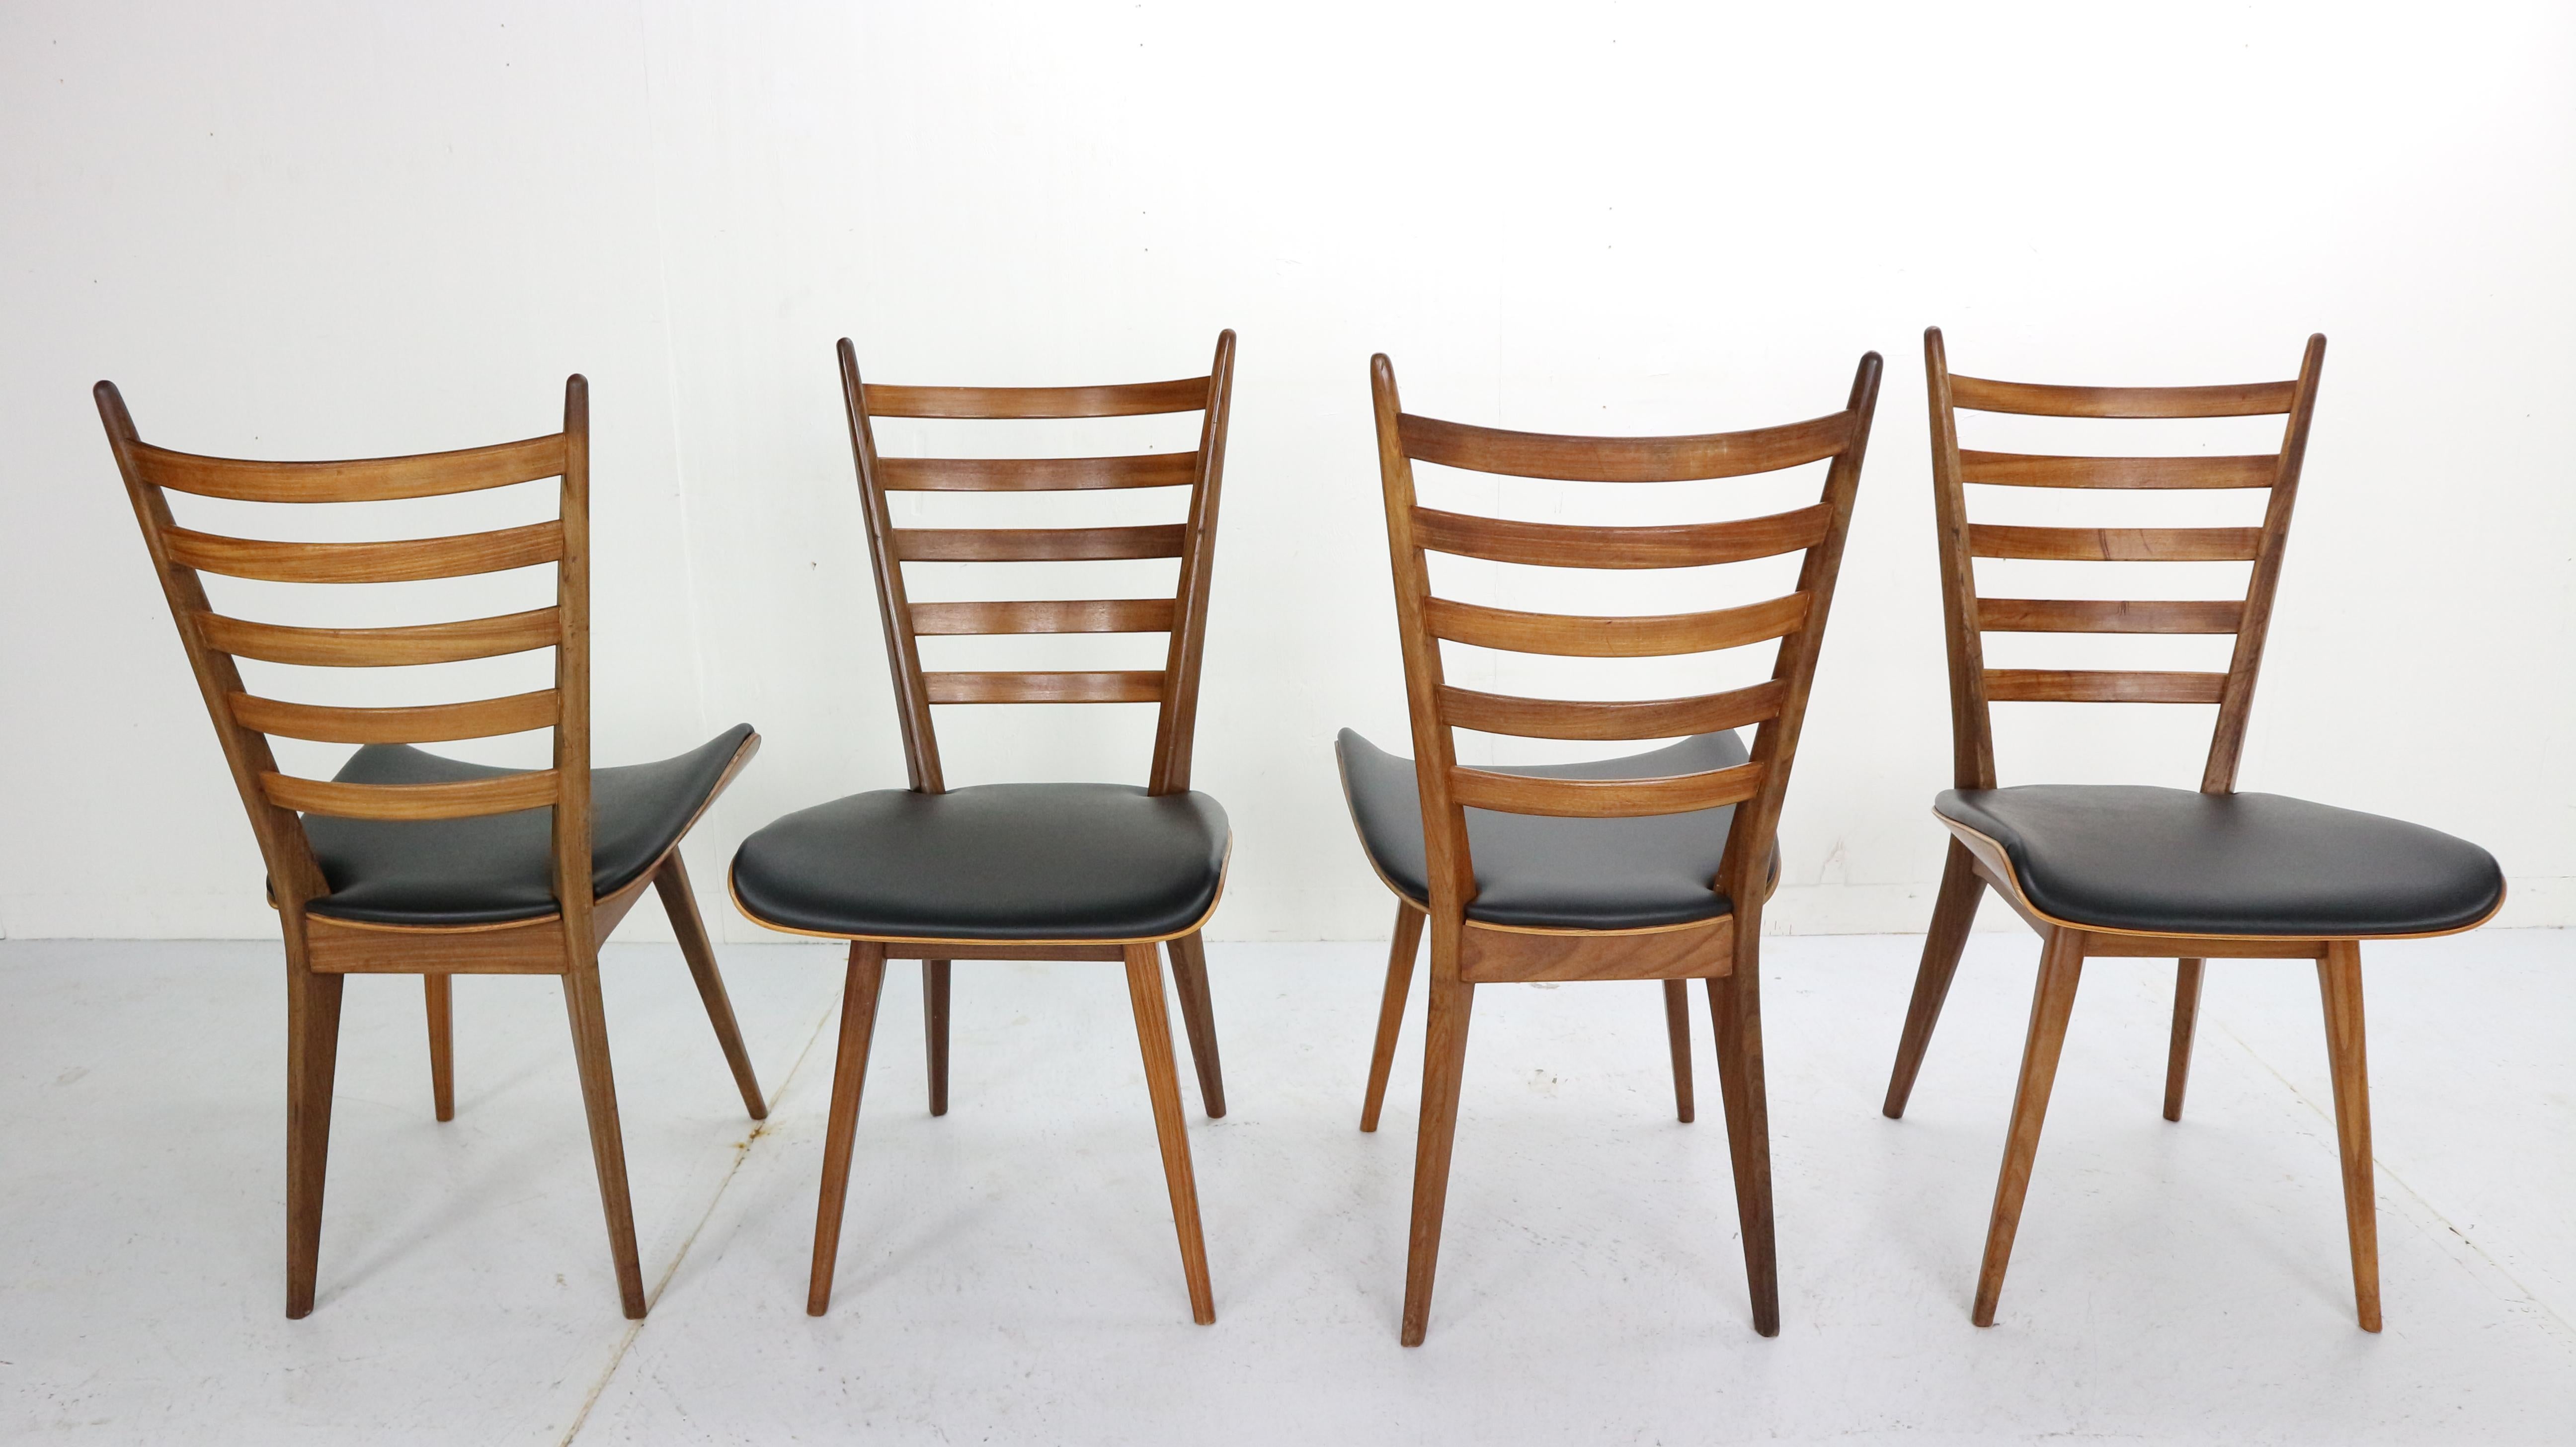 Set of four modernist chairs designed by Cees Braakman in the 1960s. Manufactured in the Netherlands by Pastoe.
These chairs has a large curved seating back and it's made of African teak wood.
Seats are covered with black faux